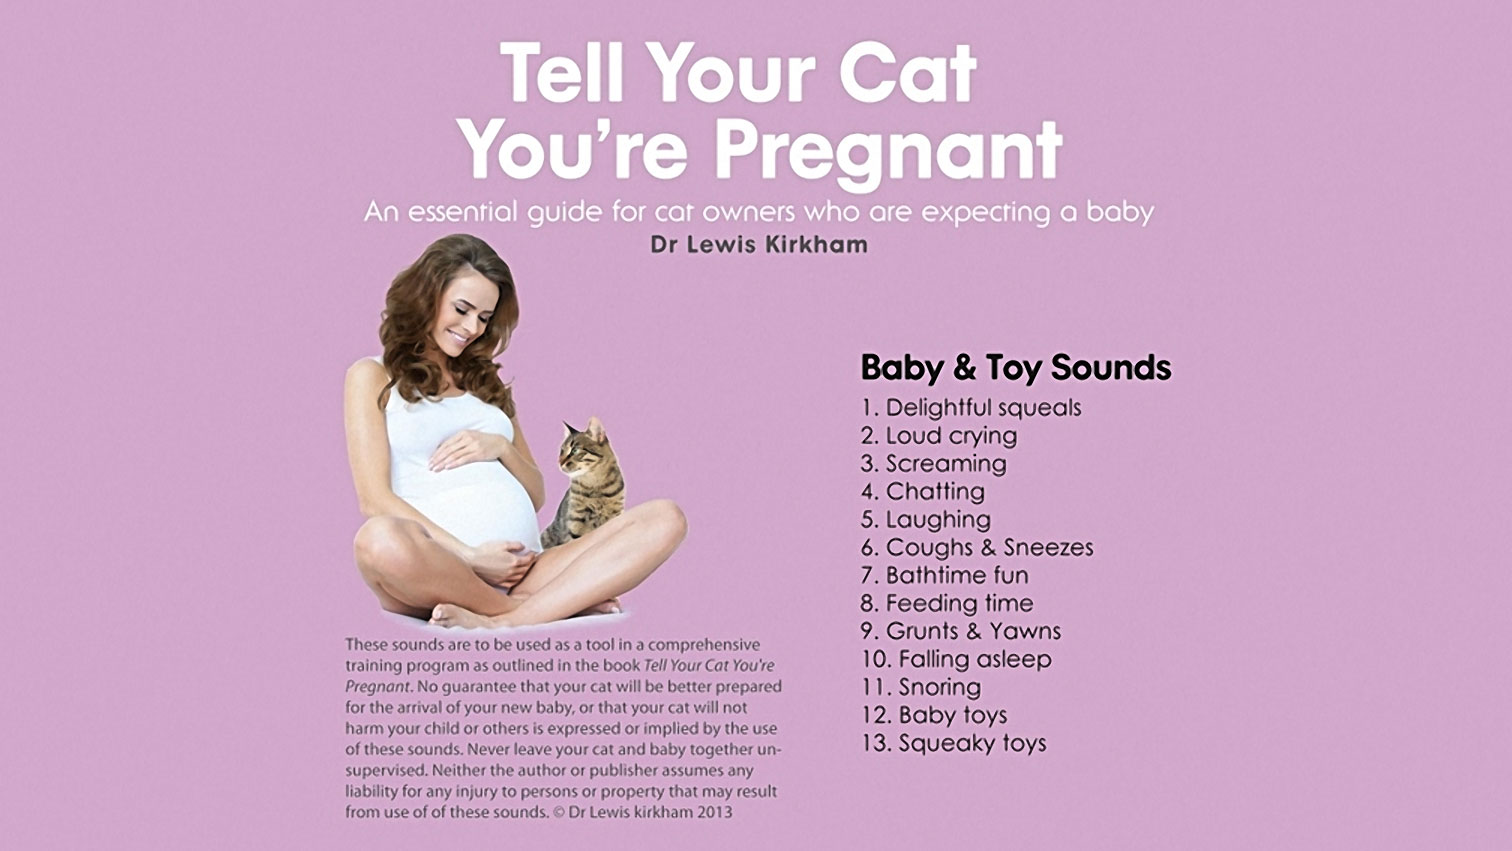 Tell your cat you're pregnant / Boing Boing